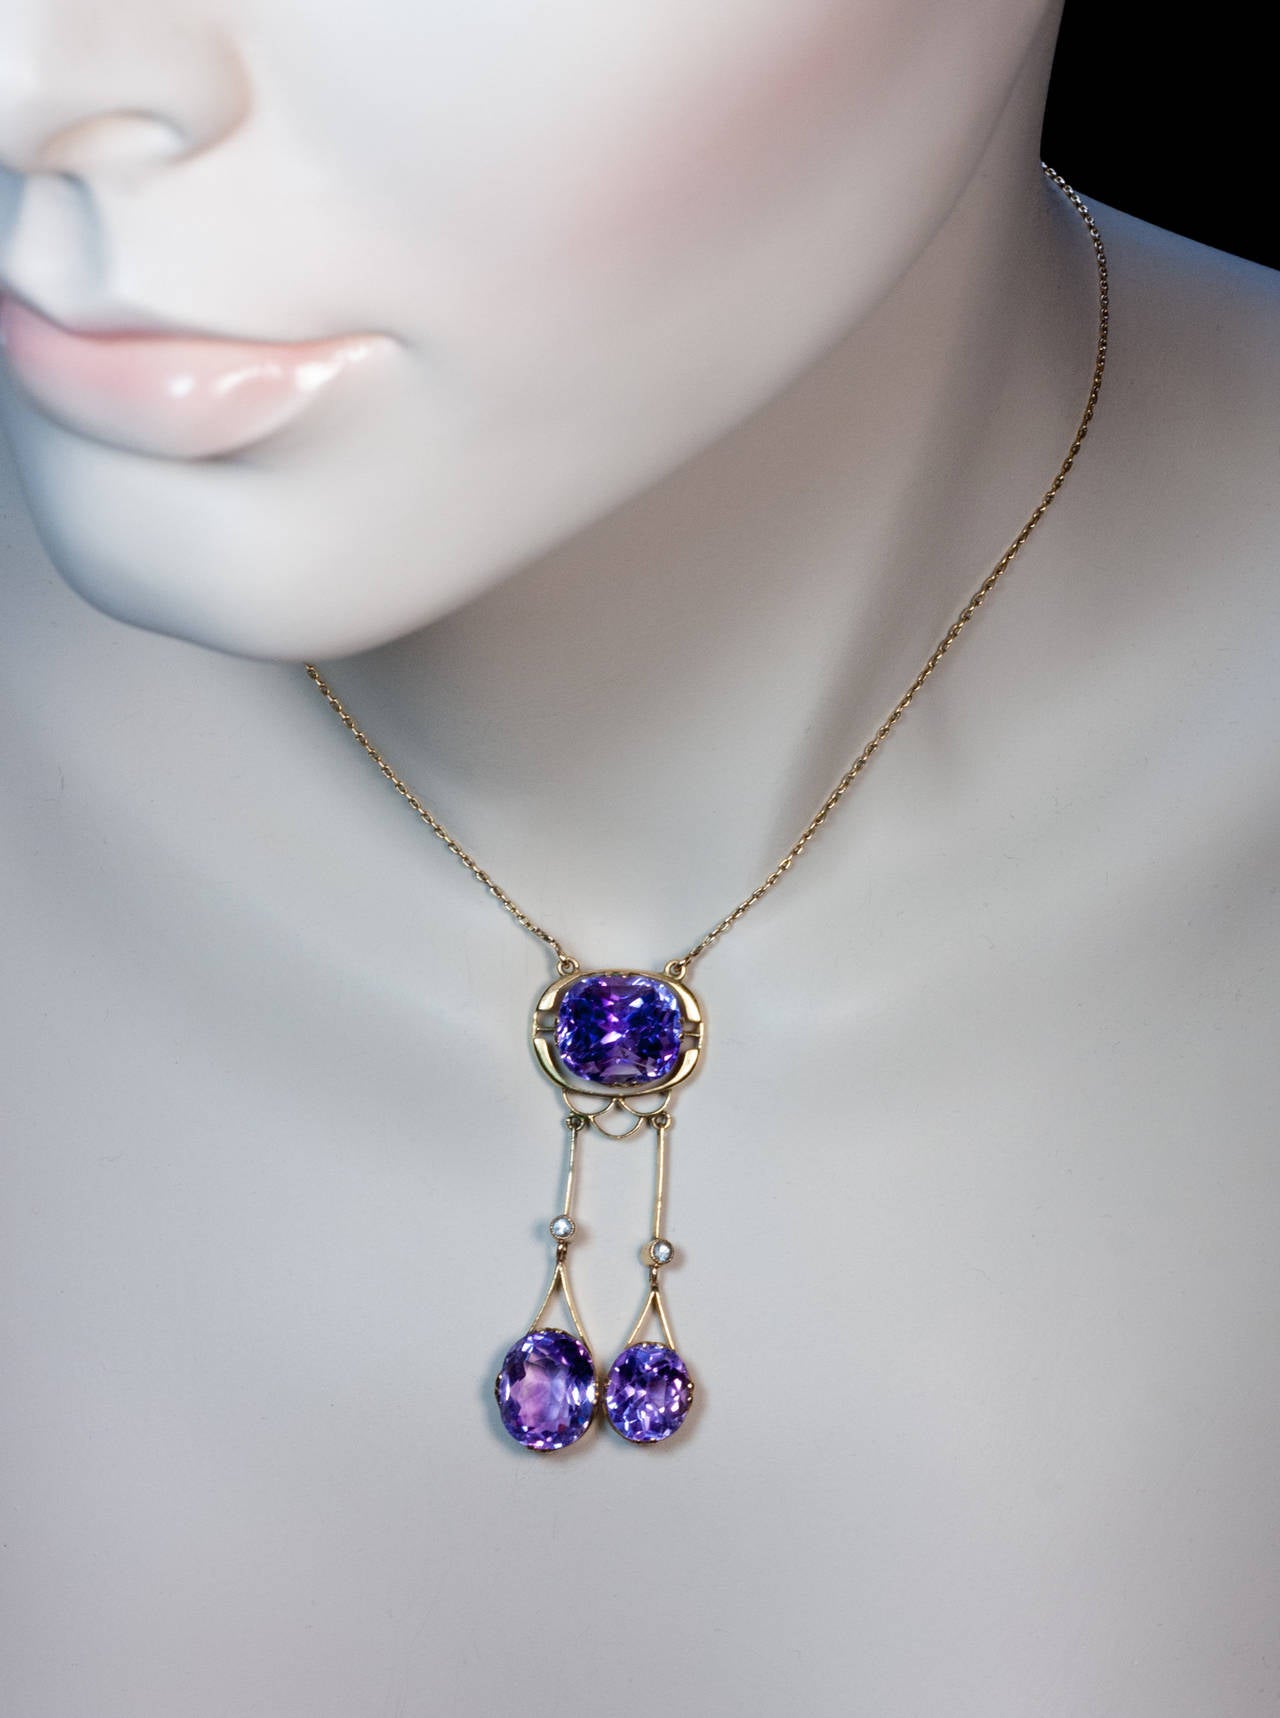 Made in Moscow between 1908 and 1917

14K gold, three sparkling Russian Siberian amethysts, two rose cut diamonds

Marked with maker's initials and 56 zolotnik gold standard

length 52 mm (2 1/8 in.)